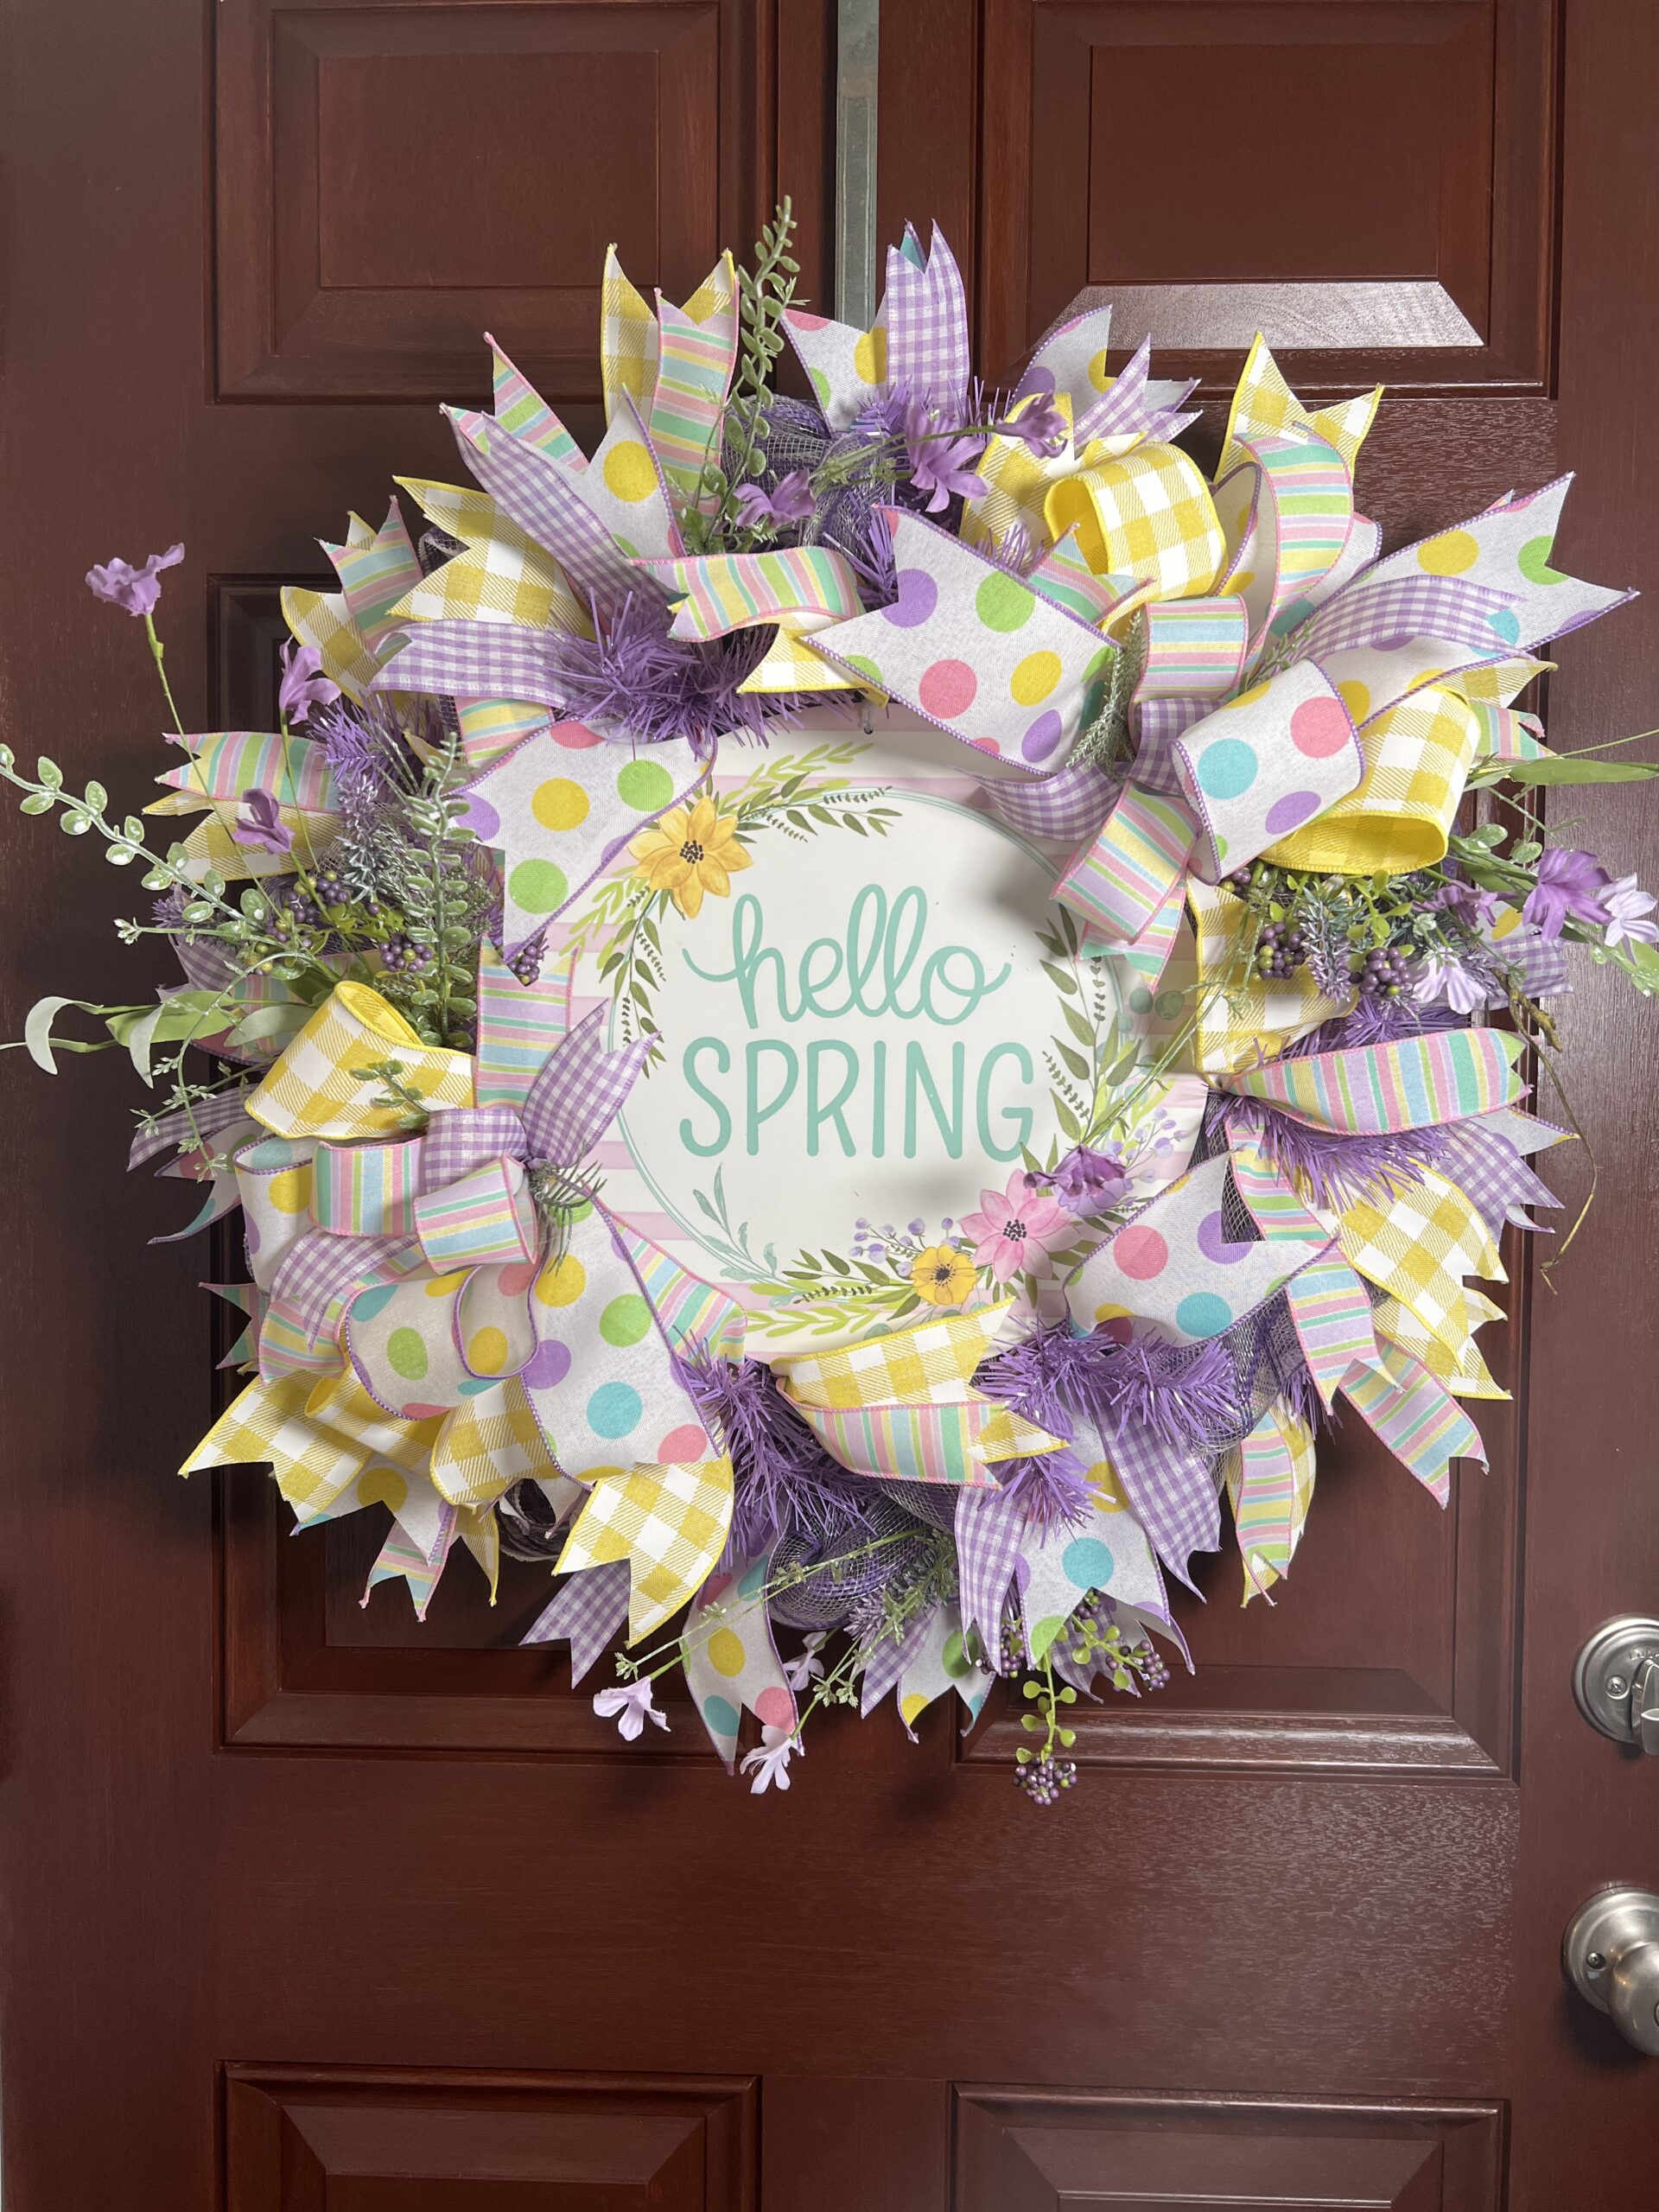 spring deco mesh wreath, hello spring sign, yellow and white plaid ribbon, purple and white gingham ribbon, spring colored polka dot ribbon, pastel spring colored striped ribbon, lavender and white plaid deco mesh base, lavender spring flowers